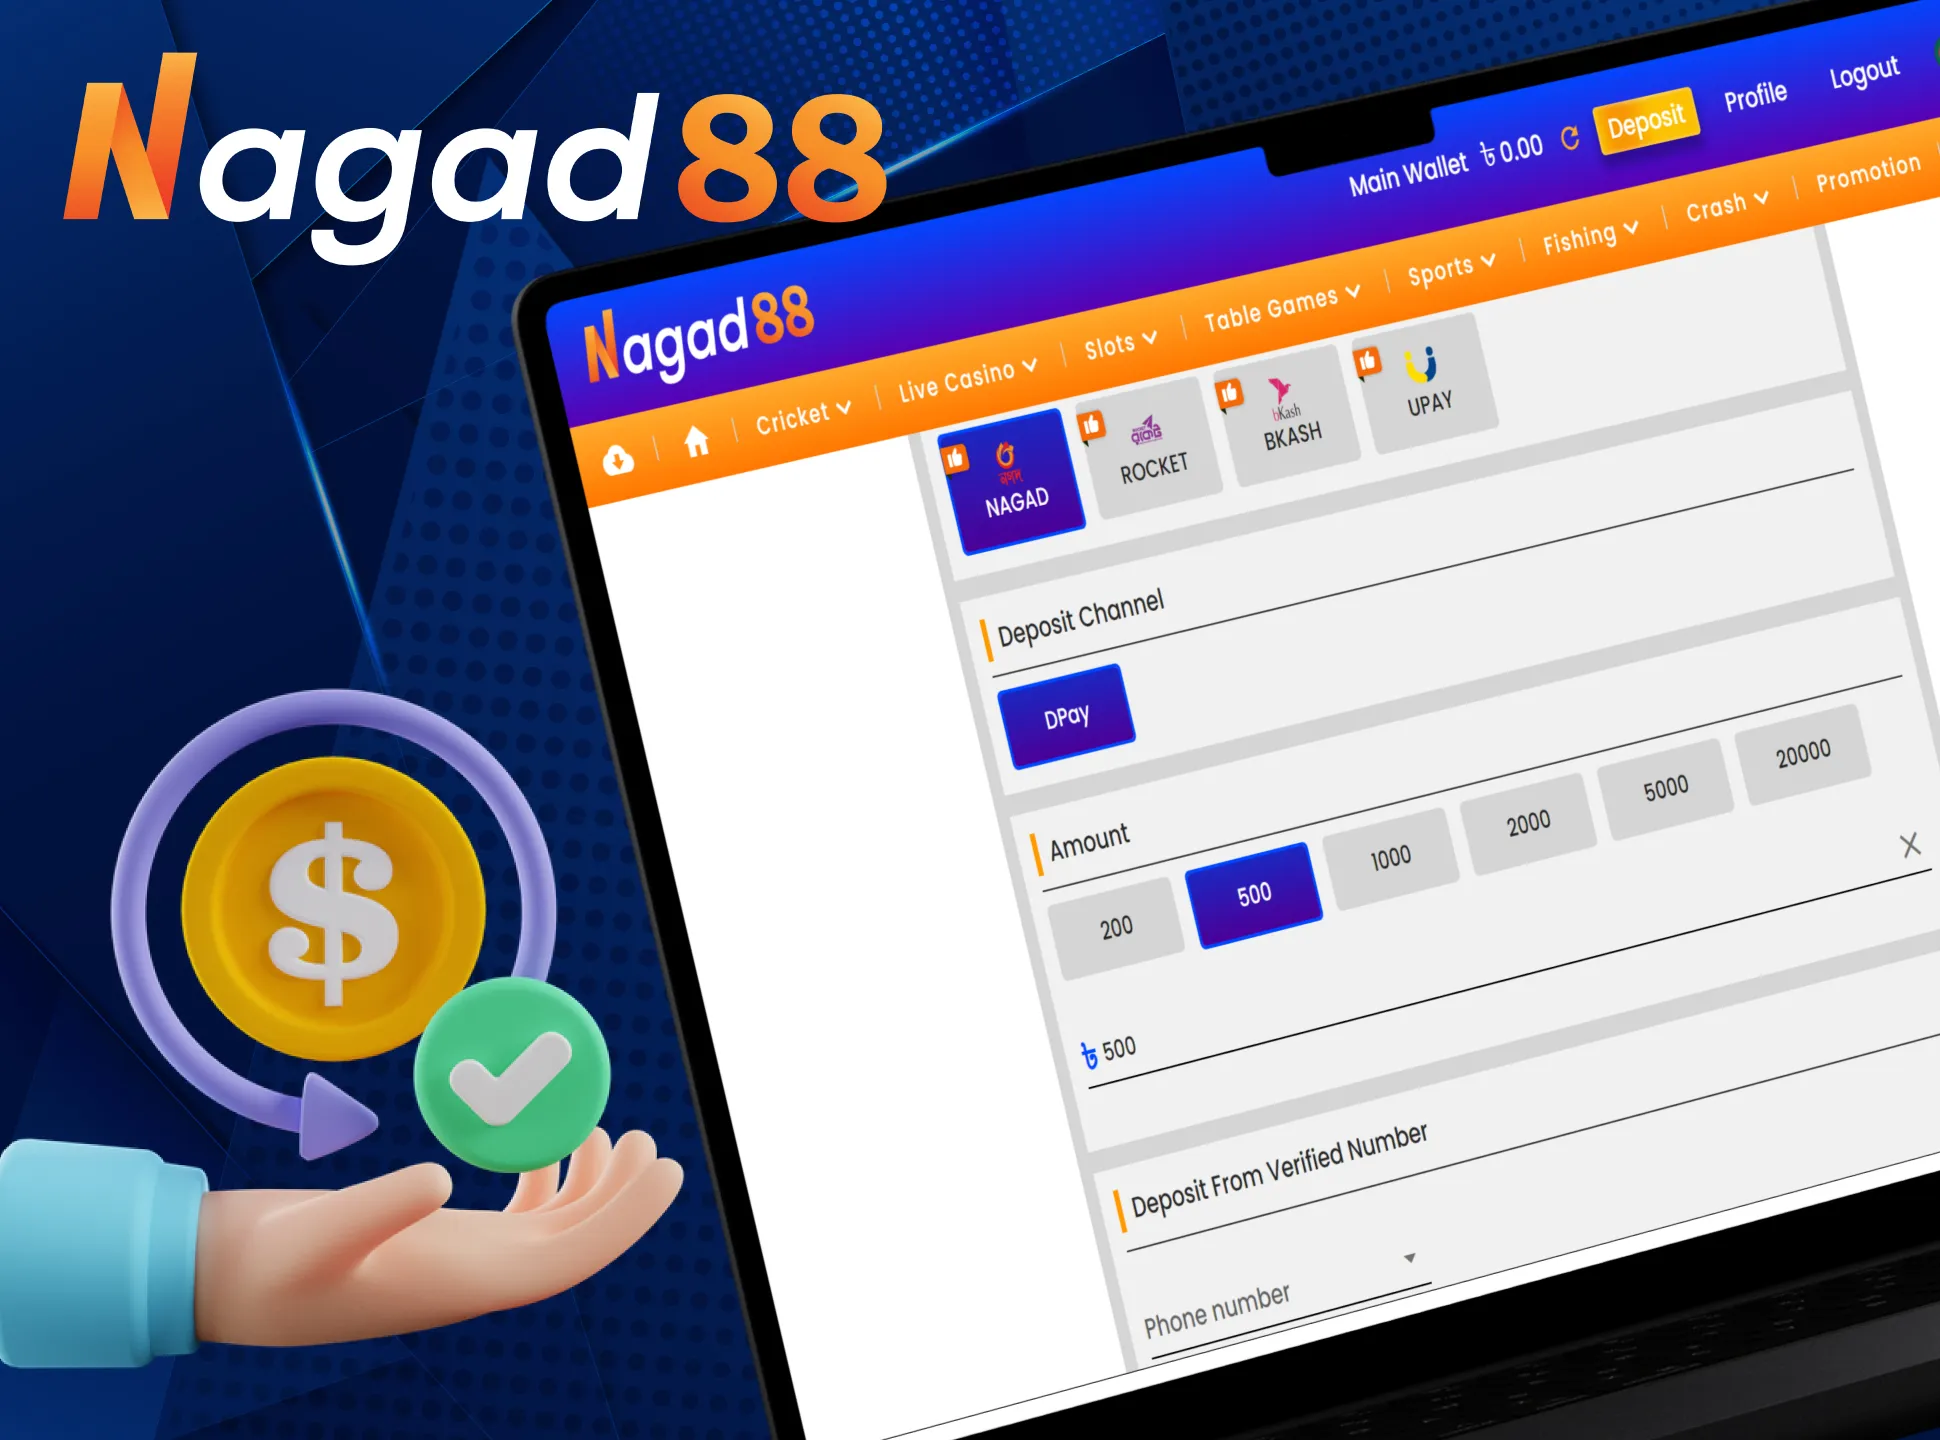 Nagad88 has a convenient deposit and withdrawal system.